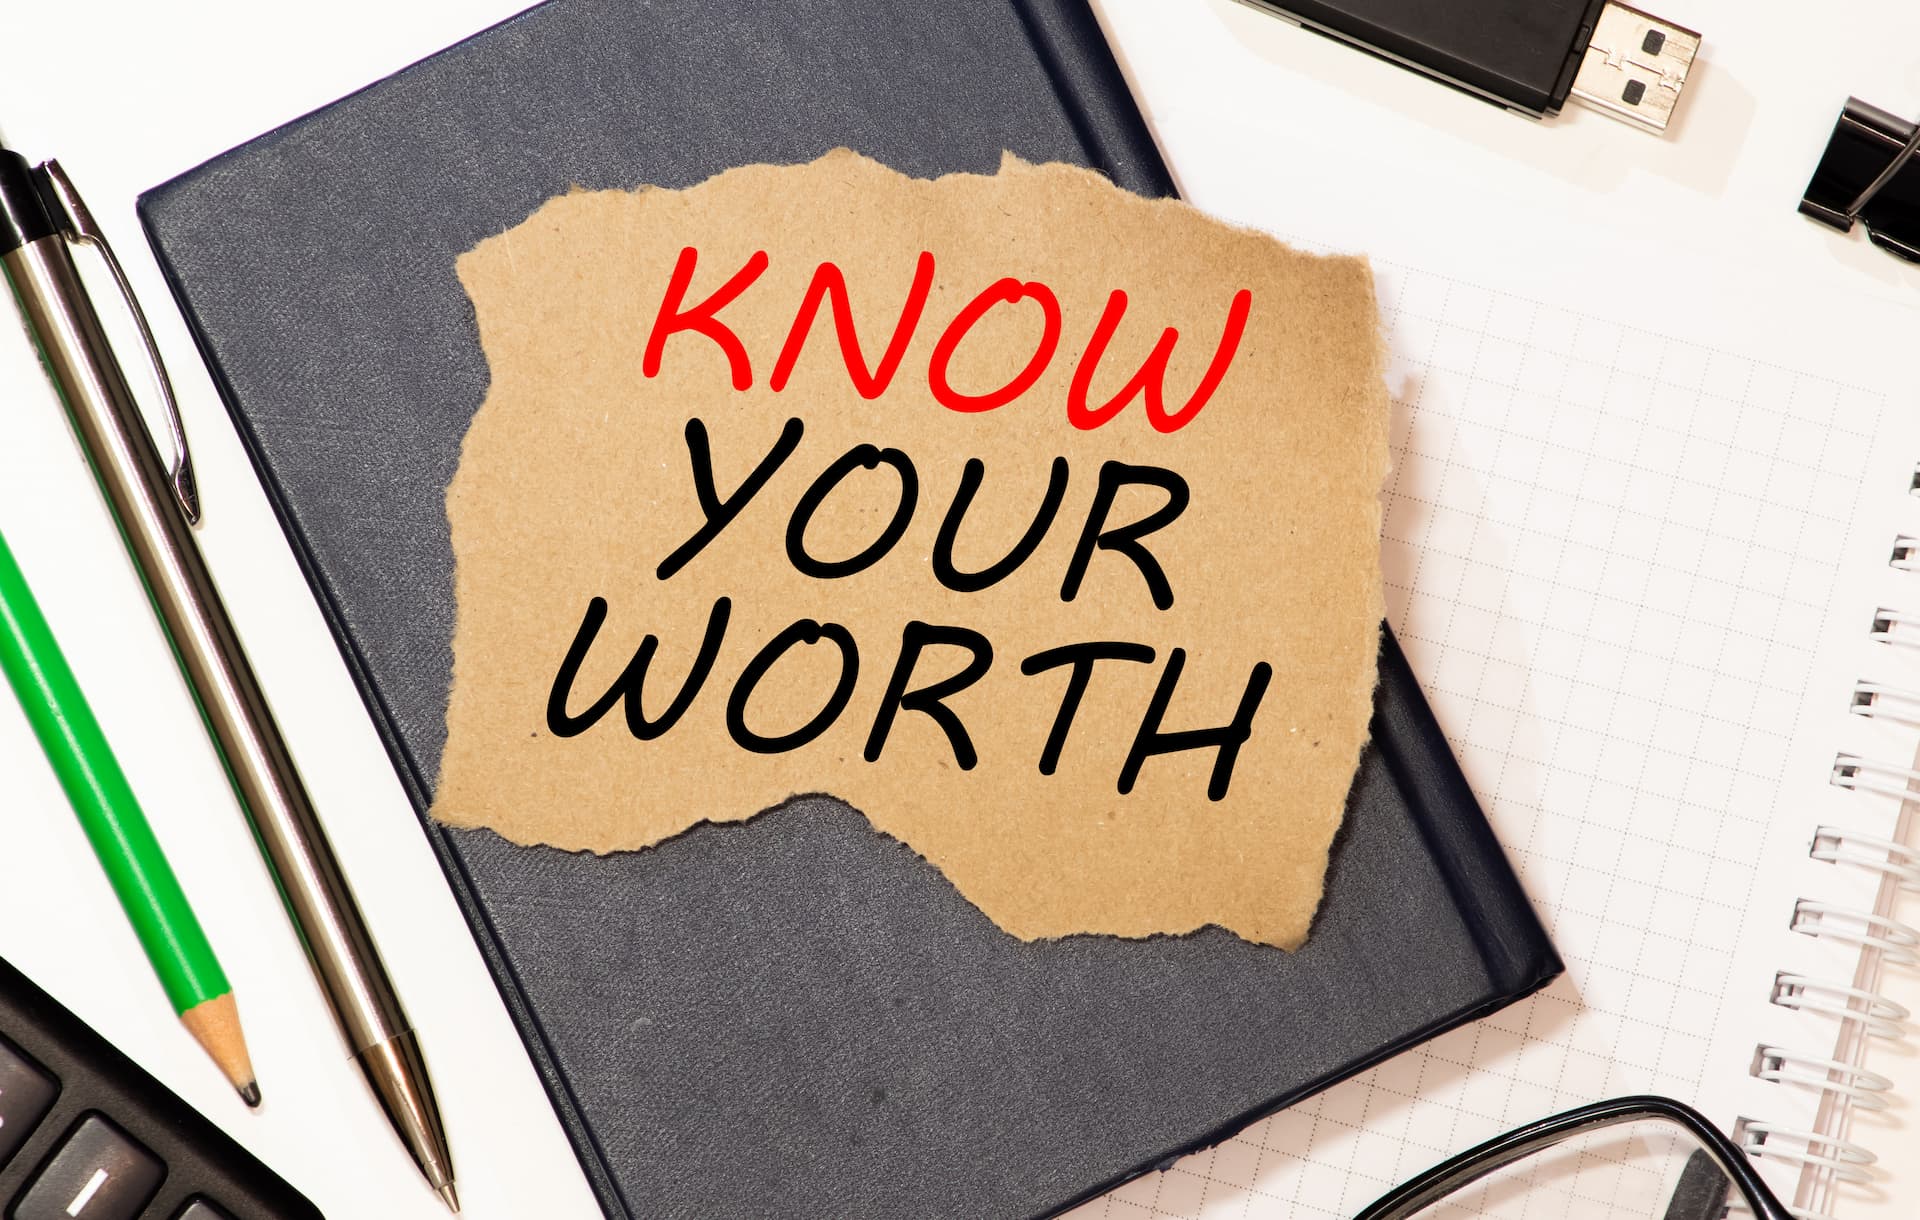 Know Your Worth written on torn brown paper sitting on top of a notebook and other office supplies on a desk.